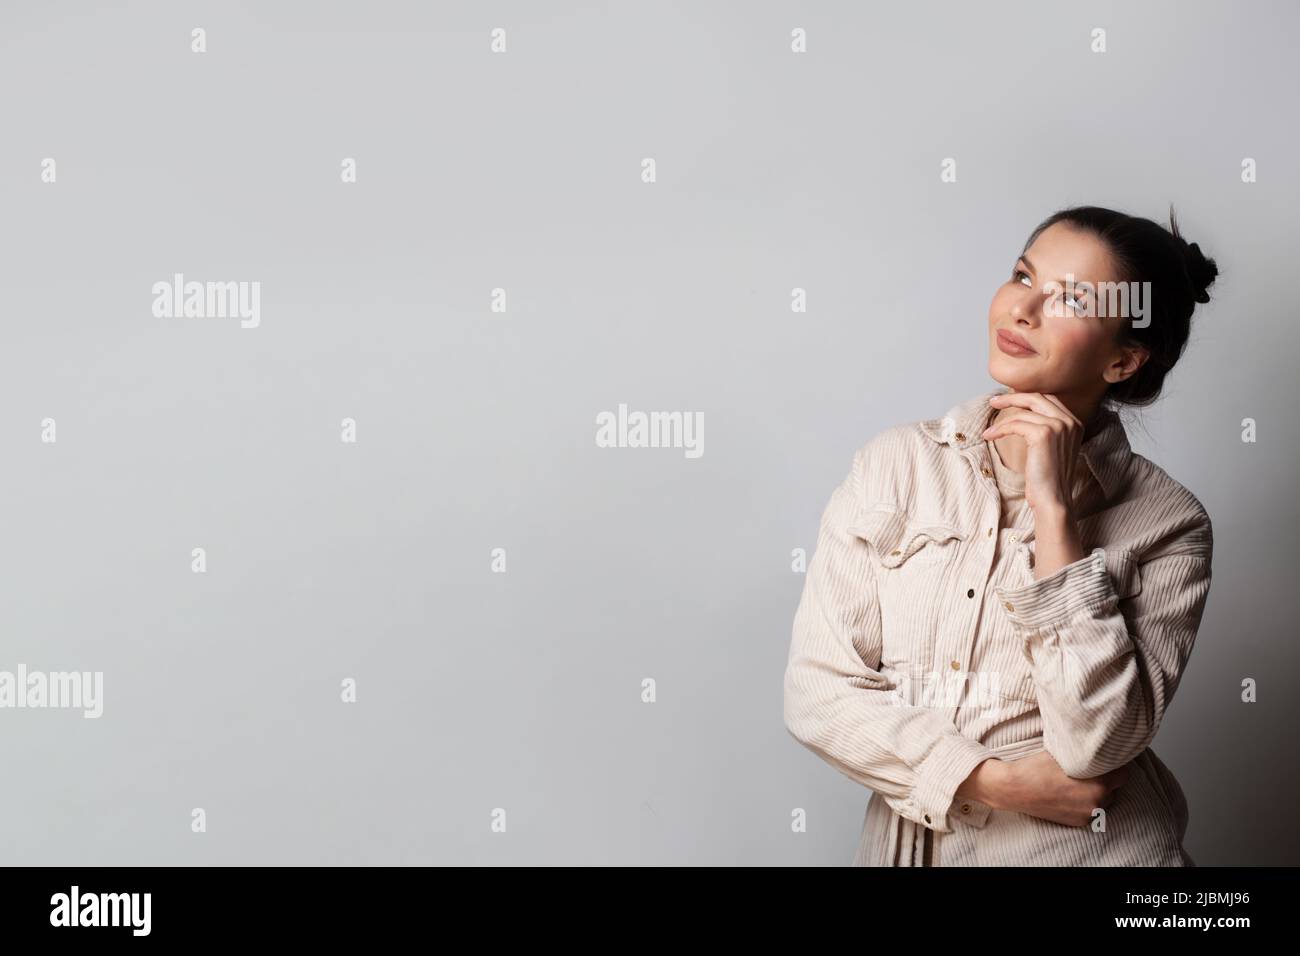 Smiling young woman looking up on grey banner background Stock Photo